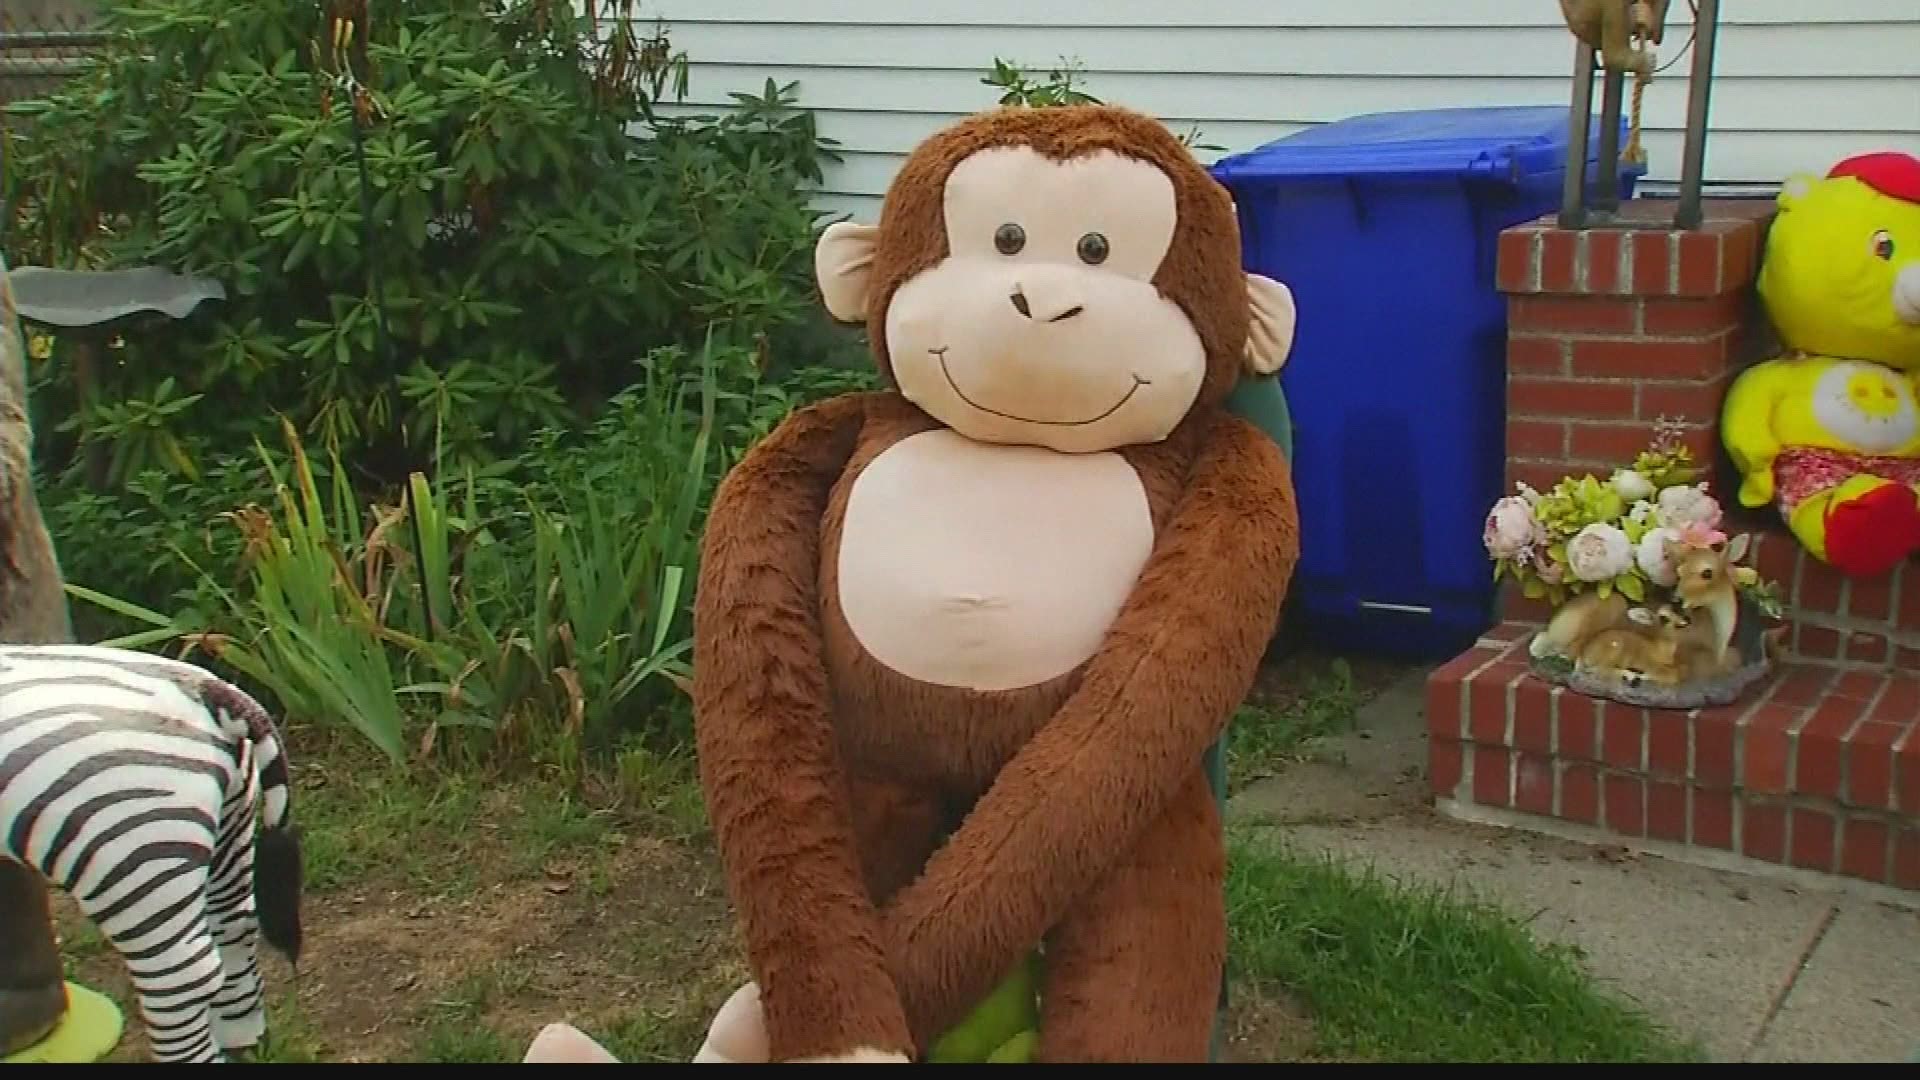 A woman in Rhode Island spent her stimulus check on stuffed animals to build a "zoo" in her front yard.